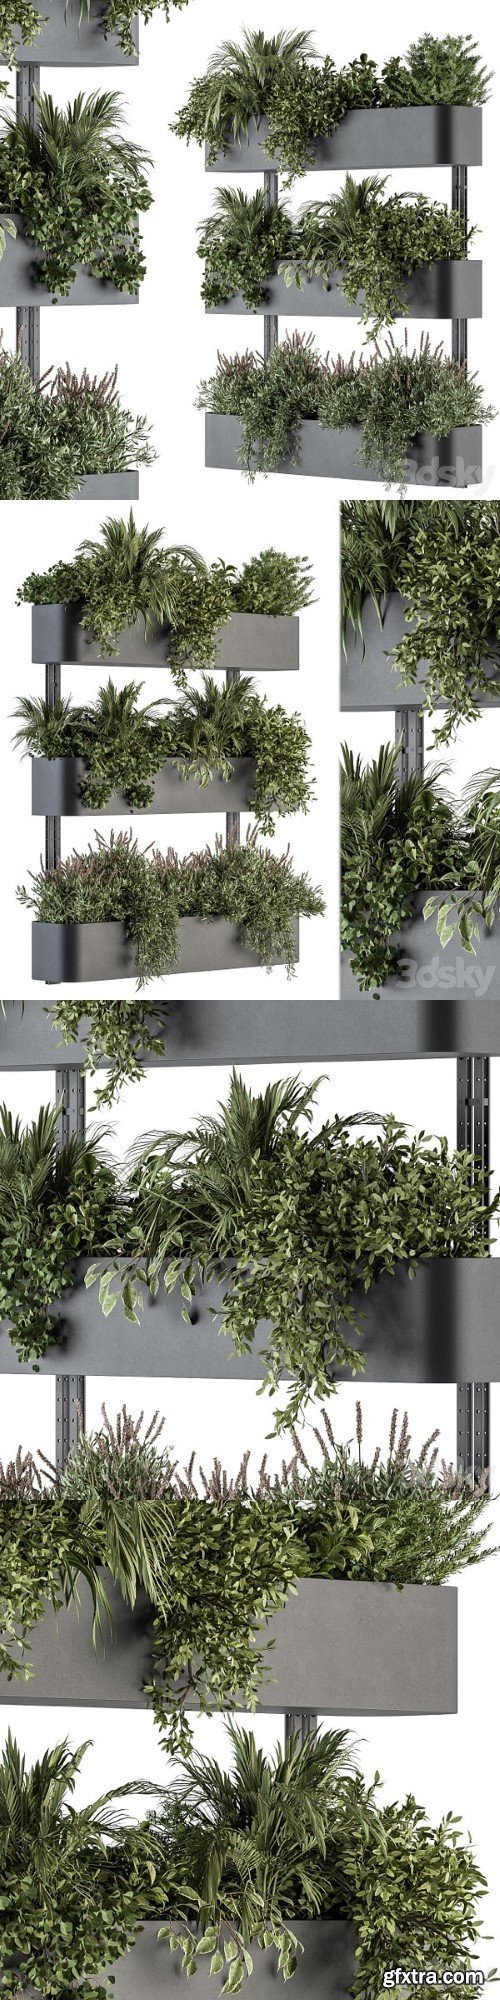 Indoor Plant Set 306 Box Stand With Hanging Plants